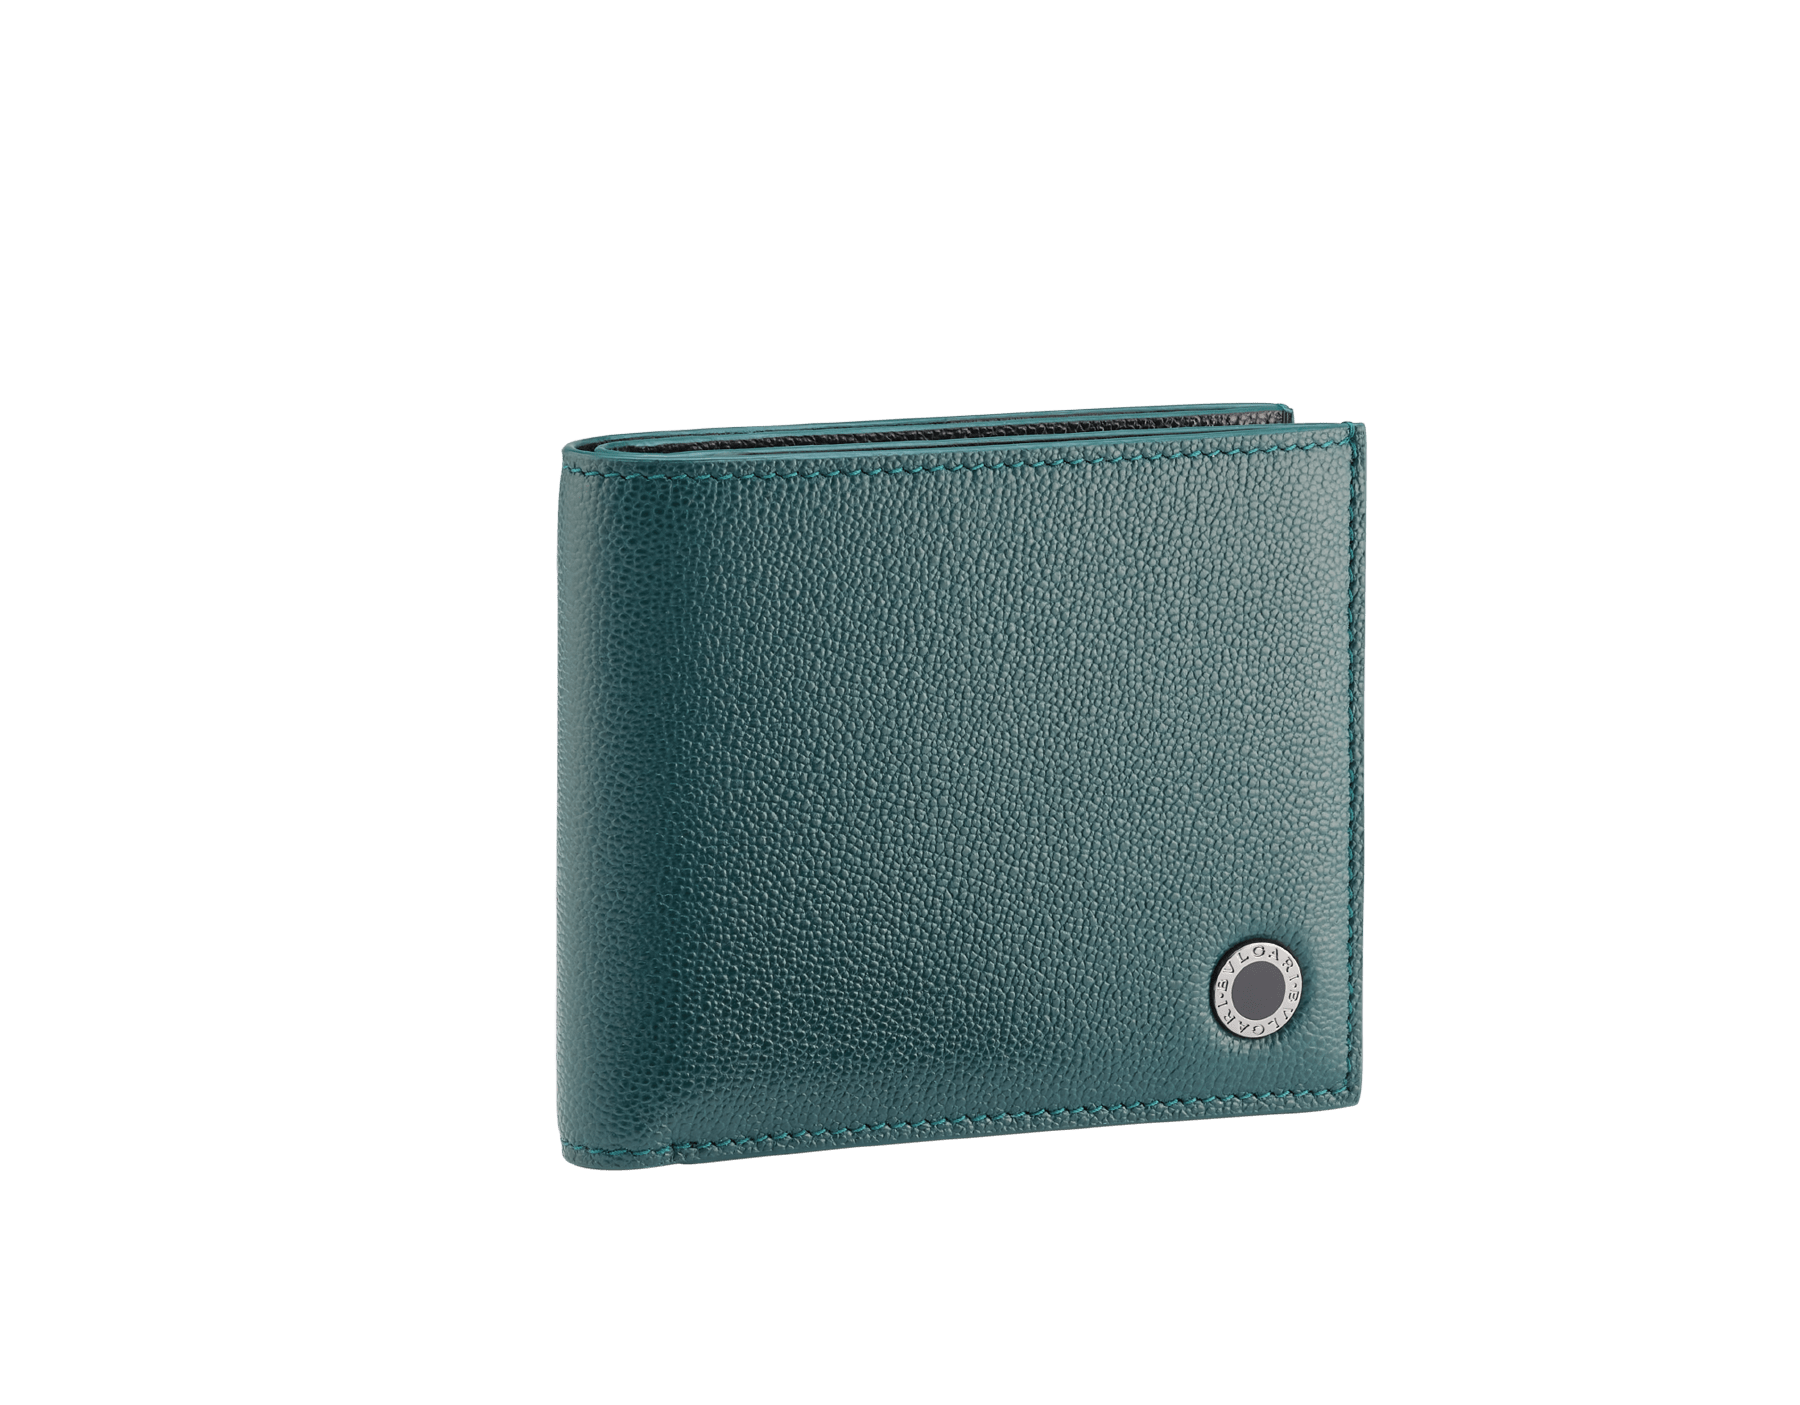 "BVLGARI BVLGARI" men's compact wallet in black and Forest Emerald green "Urban" grain calf leather. Iconic logo embellishment in dark ruthenium-plated brass with black enamelling. BBM-WLT2FASYM image 1